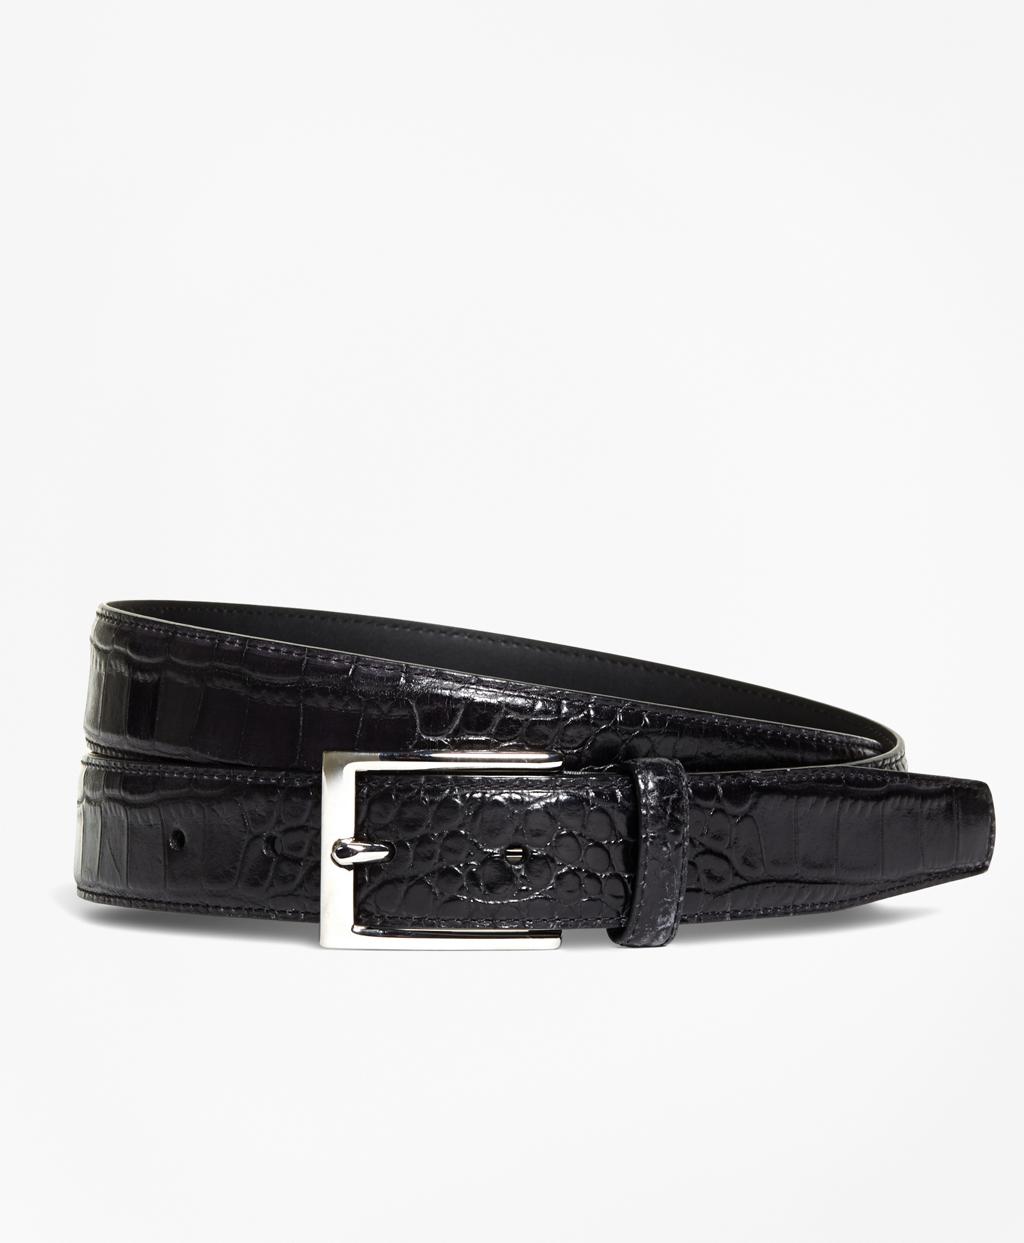 Brooks Brothers Embossed Leather Belt in Black for Men - Lyst